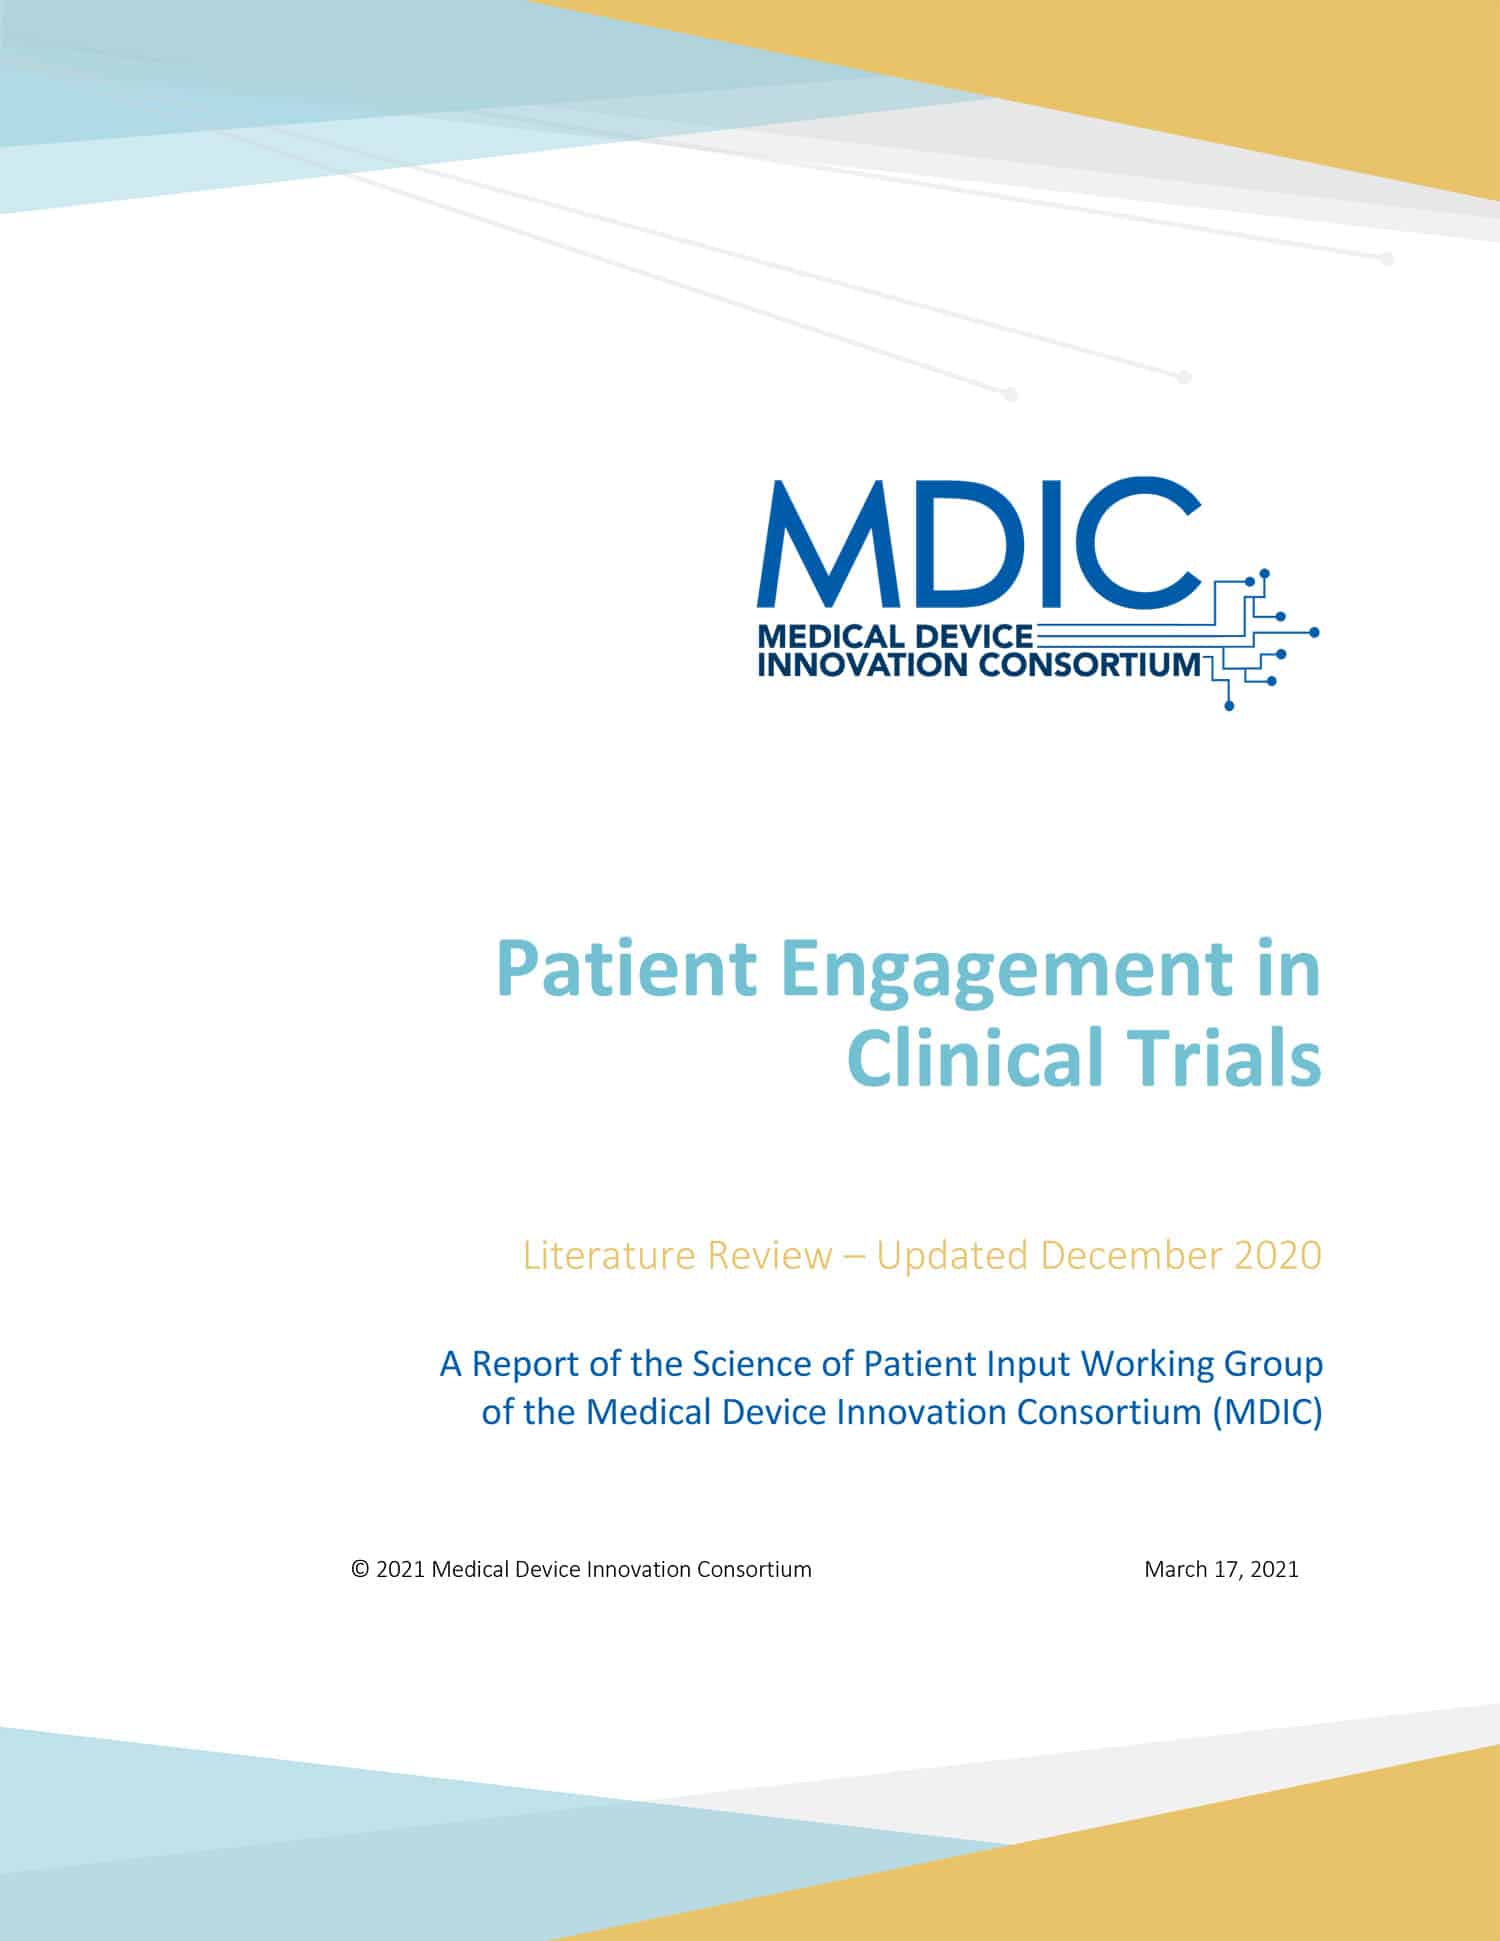 Literature Review: Patient Engagement in Clinical Trials